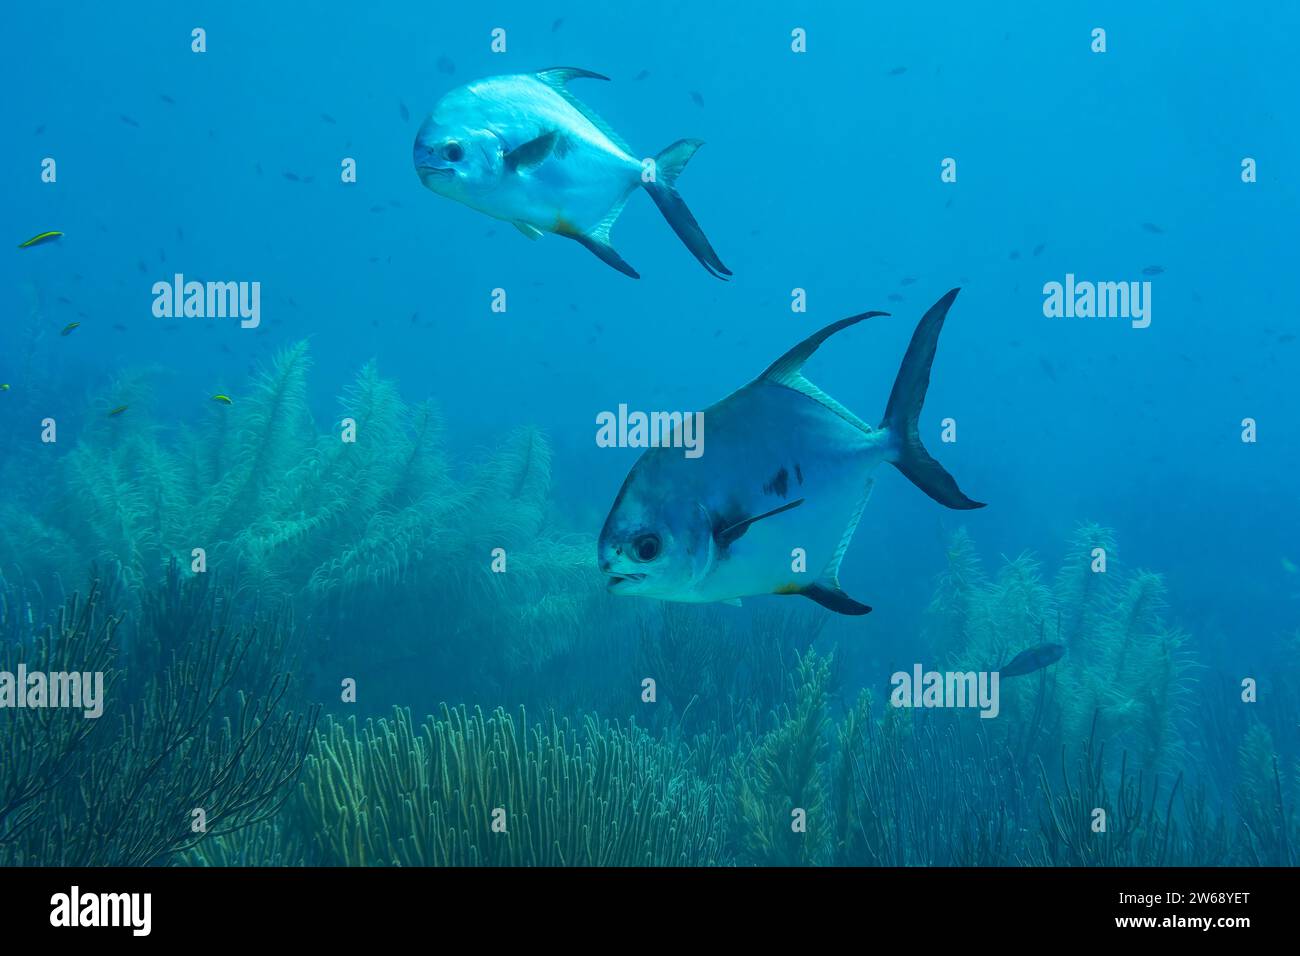 Two tropical fish explore the underwater wonders of a colorful coral reef, showcasing marine biodiversity. Stock Photo